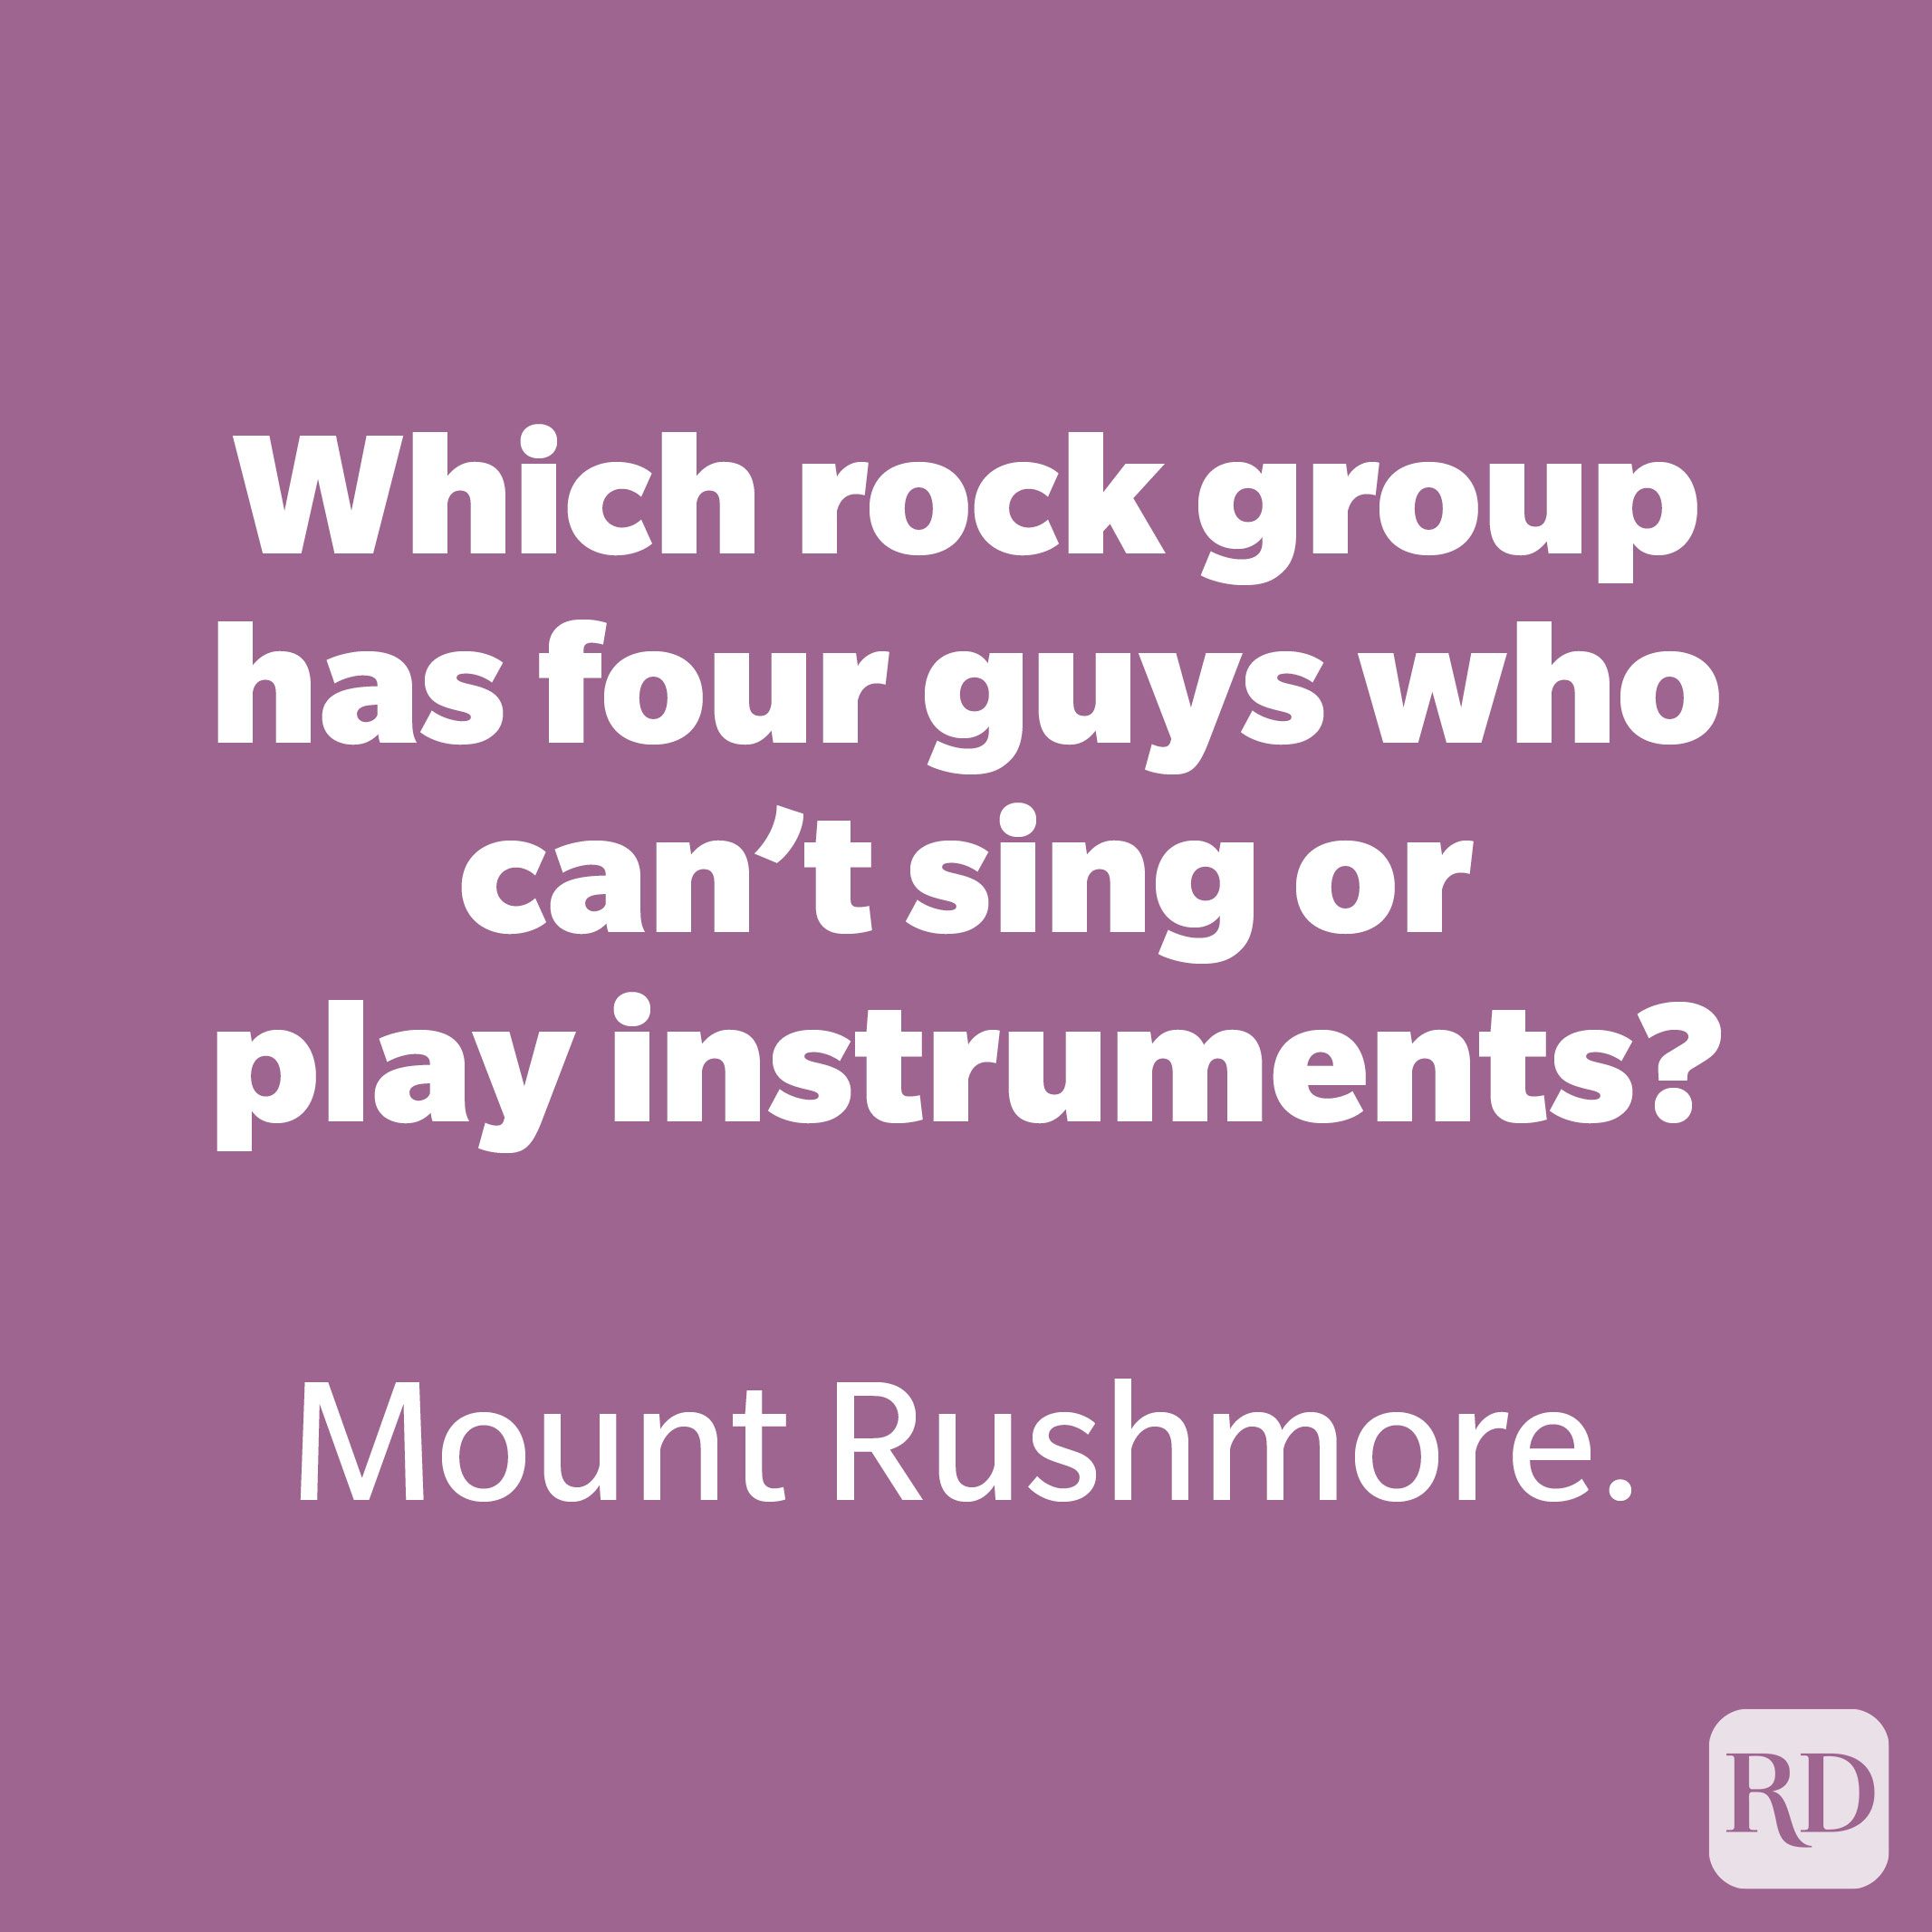 Which rock group has four guys who can't sing or play instruments?